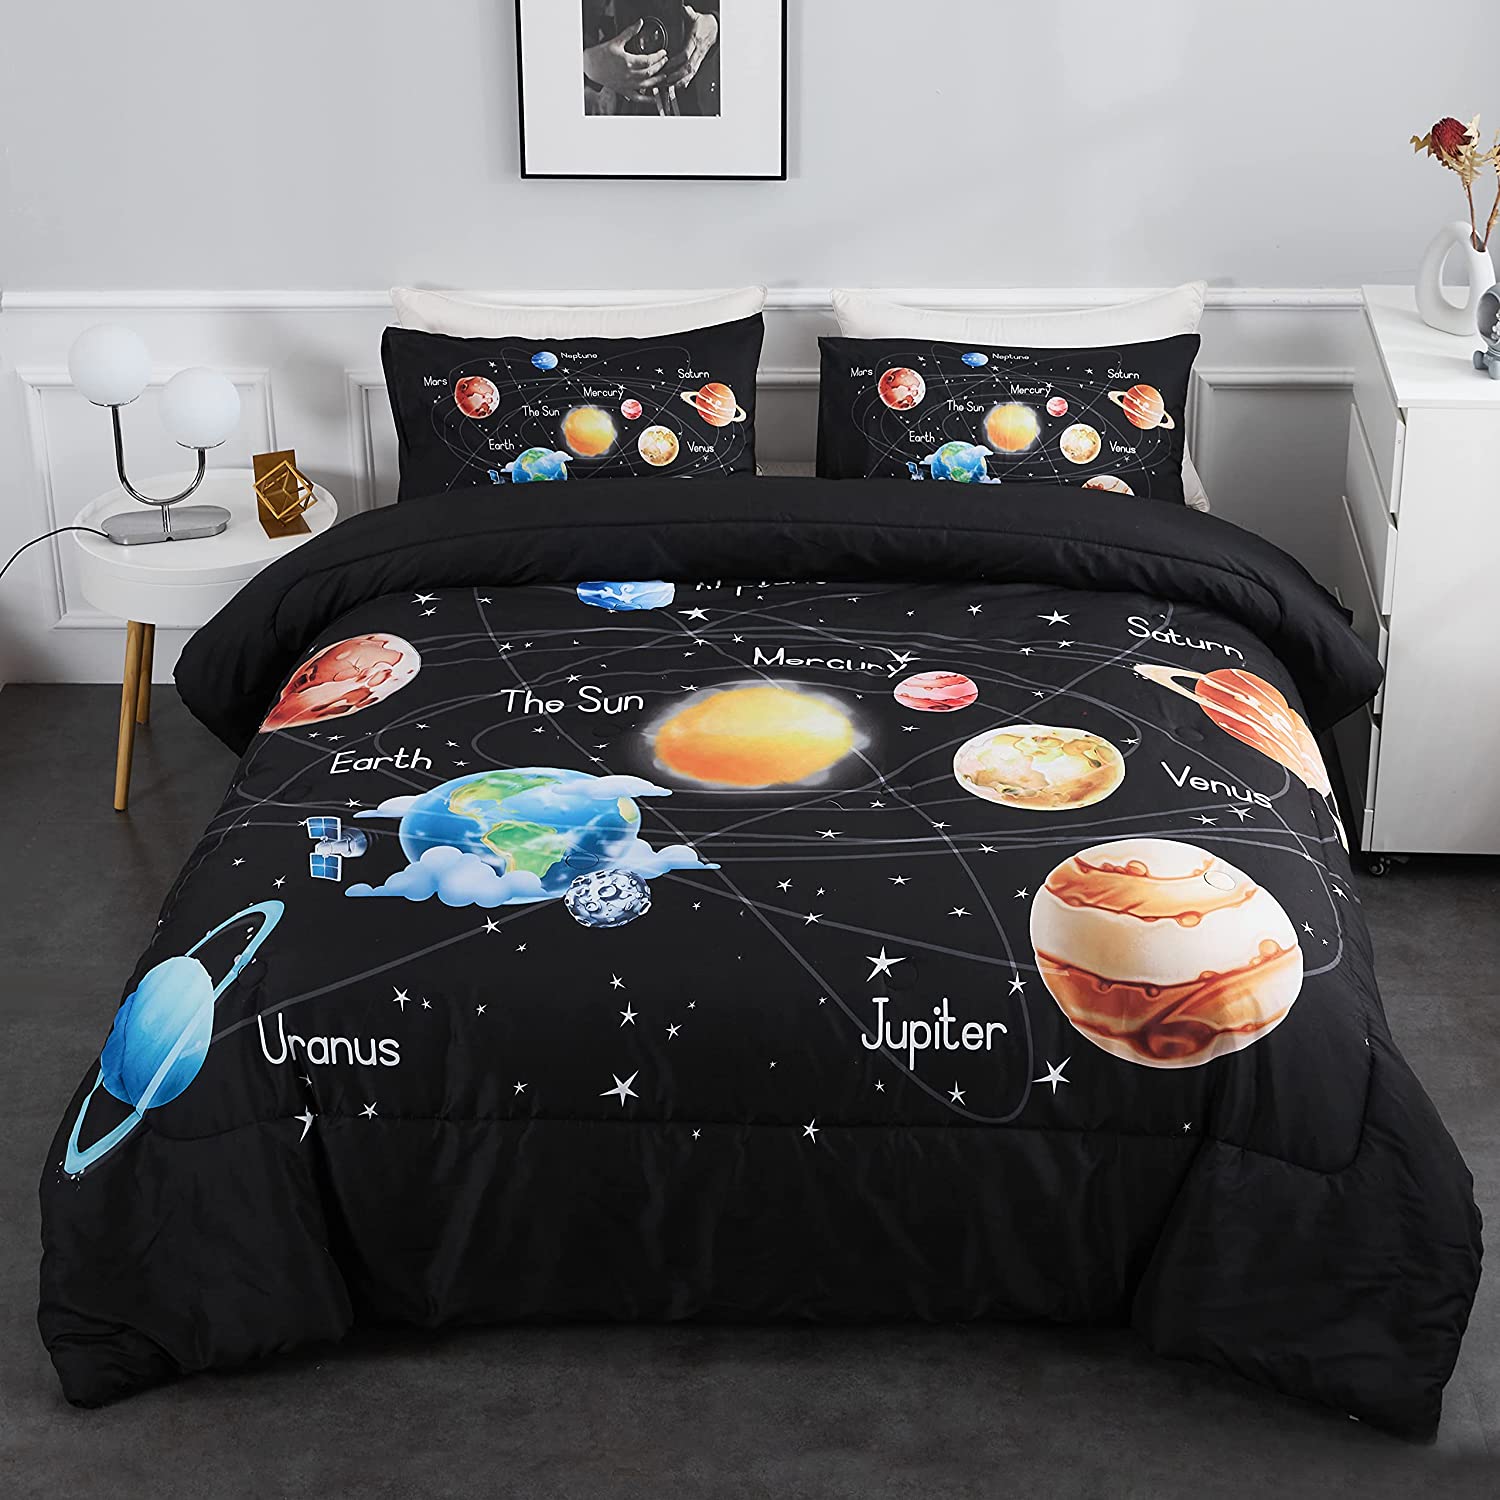 Ylehoc Solar System Comforter Set Twin Outer Space Bedding Set 3 Pieces 1 Universe Planets Theme Comforter and 2 Pillow Cases for Boys Girls Kids Ultra-Soft Microfiber All Seasons for Bedroom Sofa